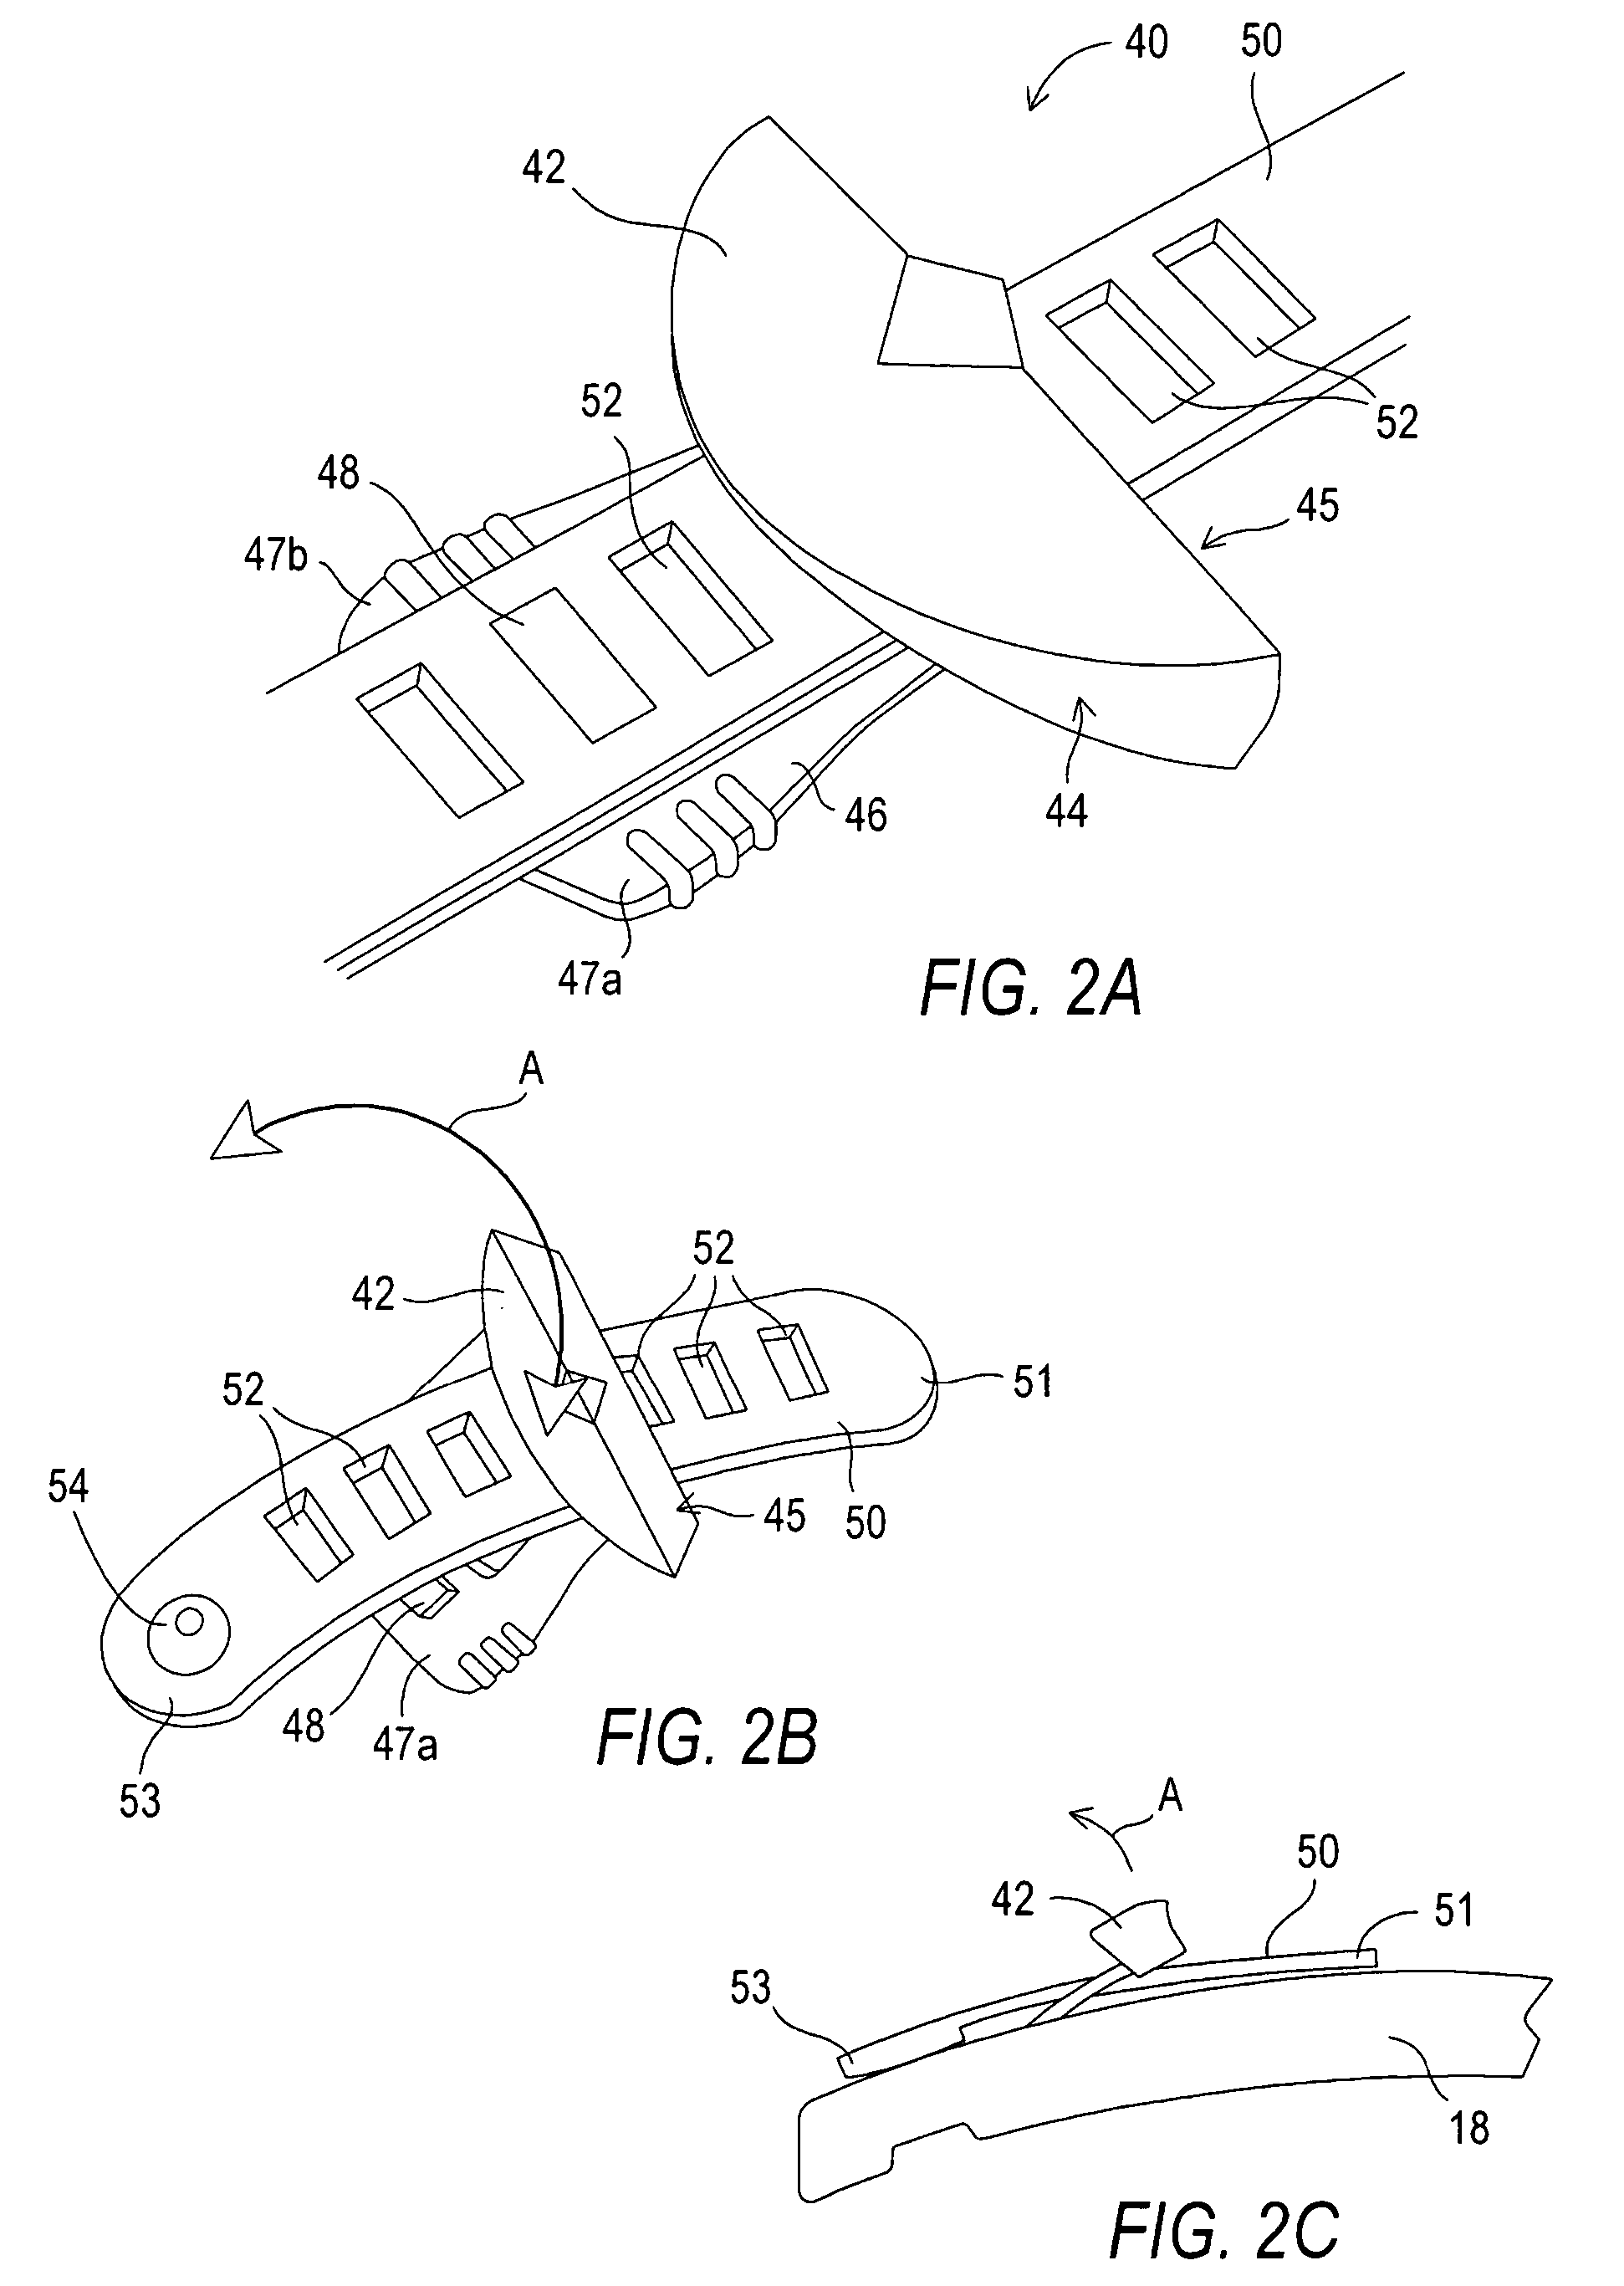 Footwear variable tension lacing systems